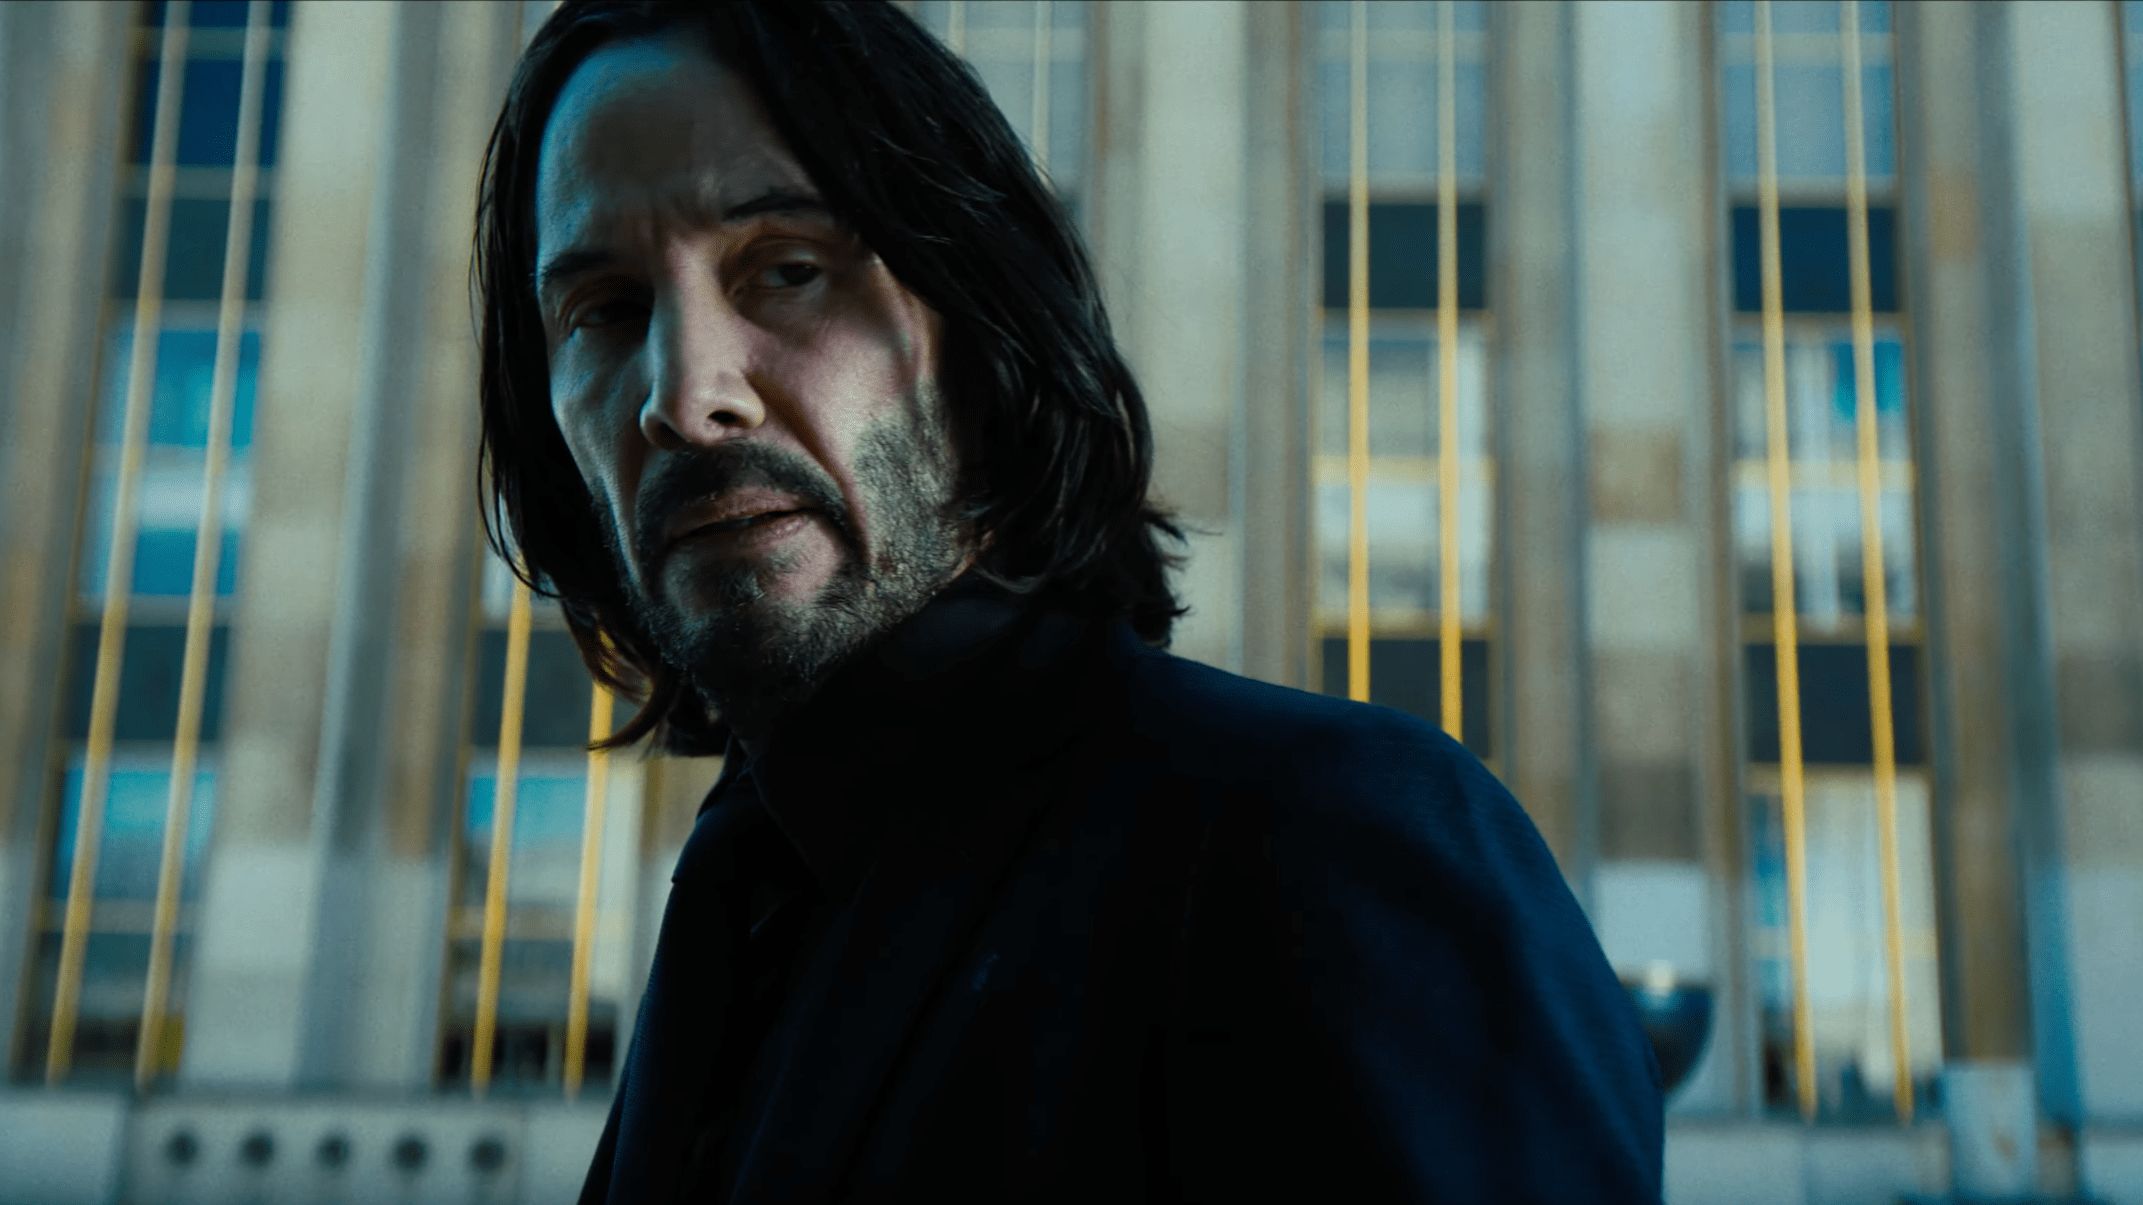 5 Reasons Why John Wick Spinoff Series Is Coming Instead of Part 4